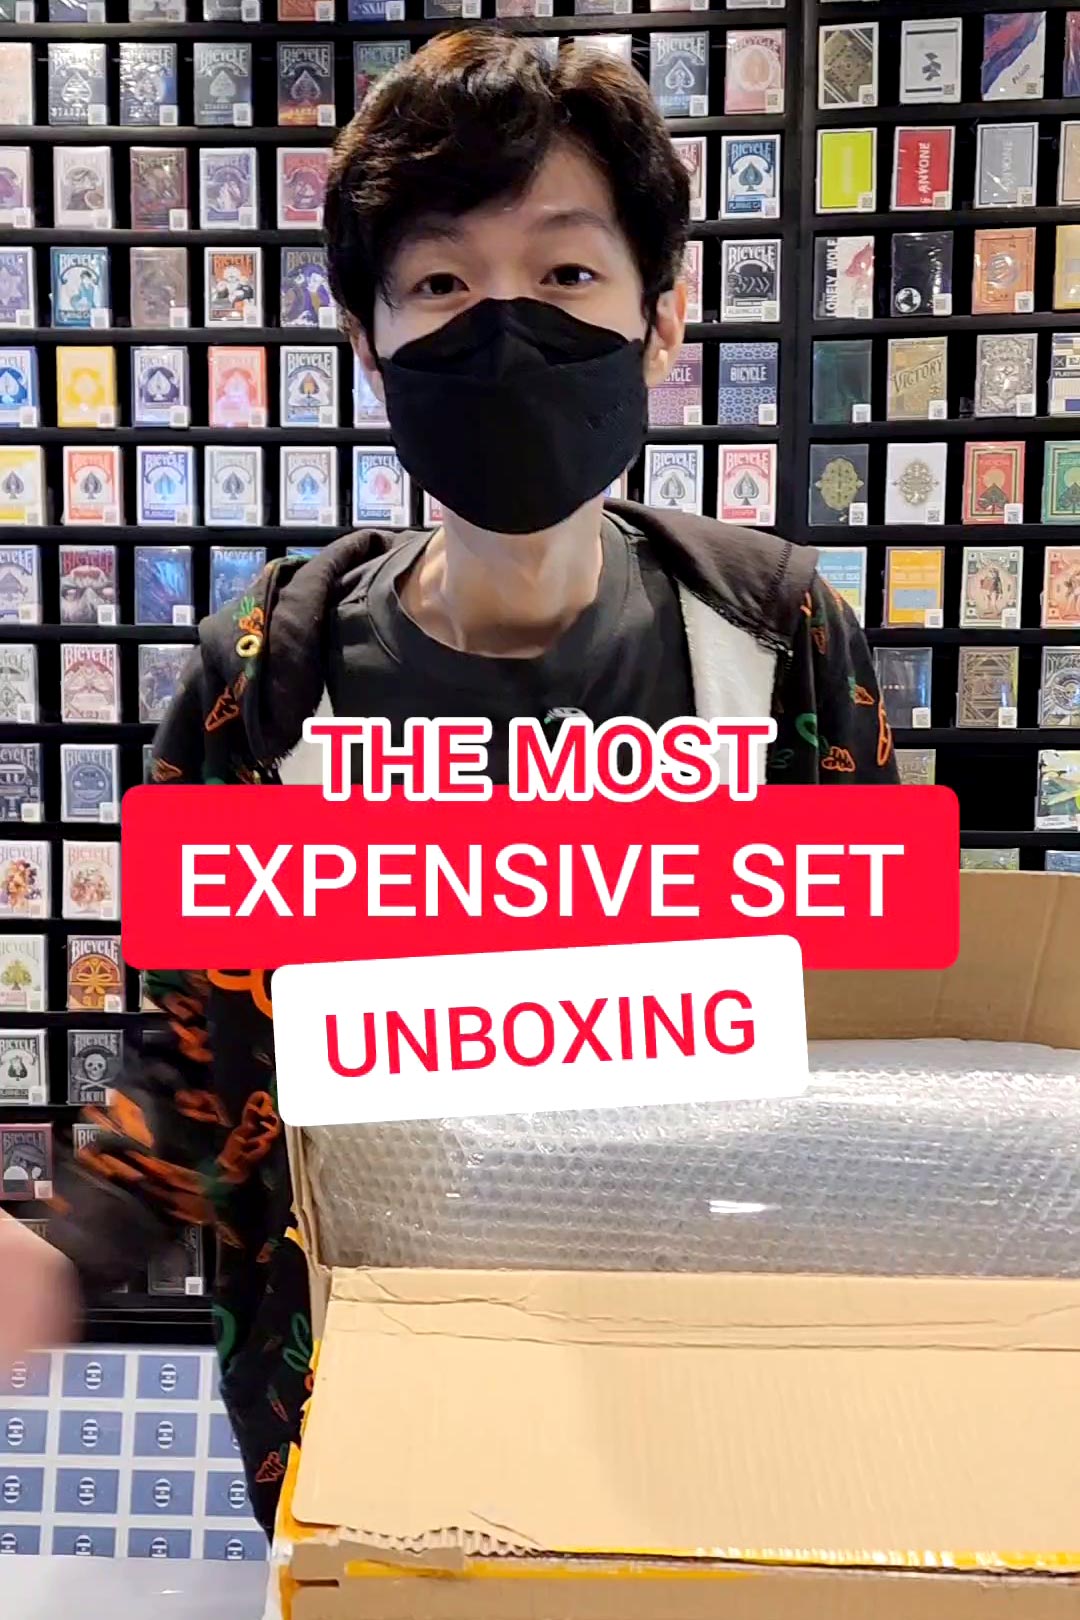 The Most Expensive Set Unboxing!